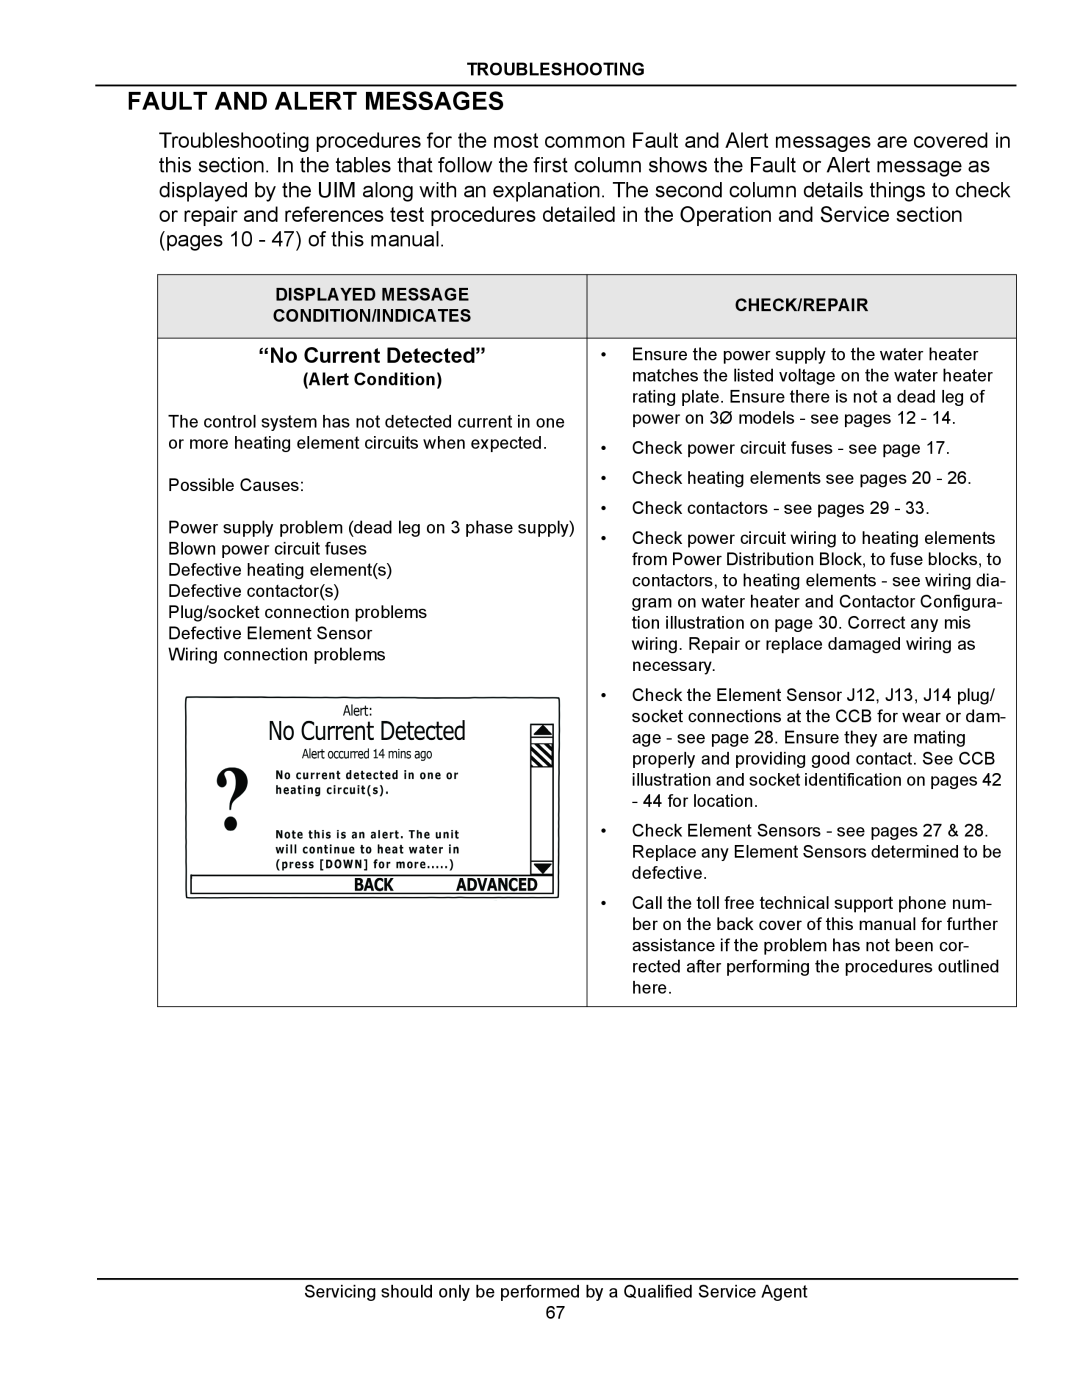 American Water Heater STCE3-52/80/119, ITCE3-52/80/119 manual Fault And Alert Messages, “No Current Detected” 